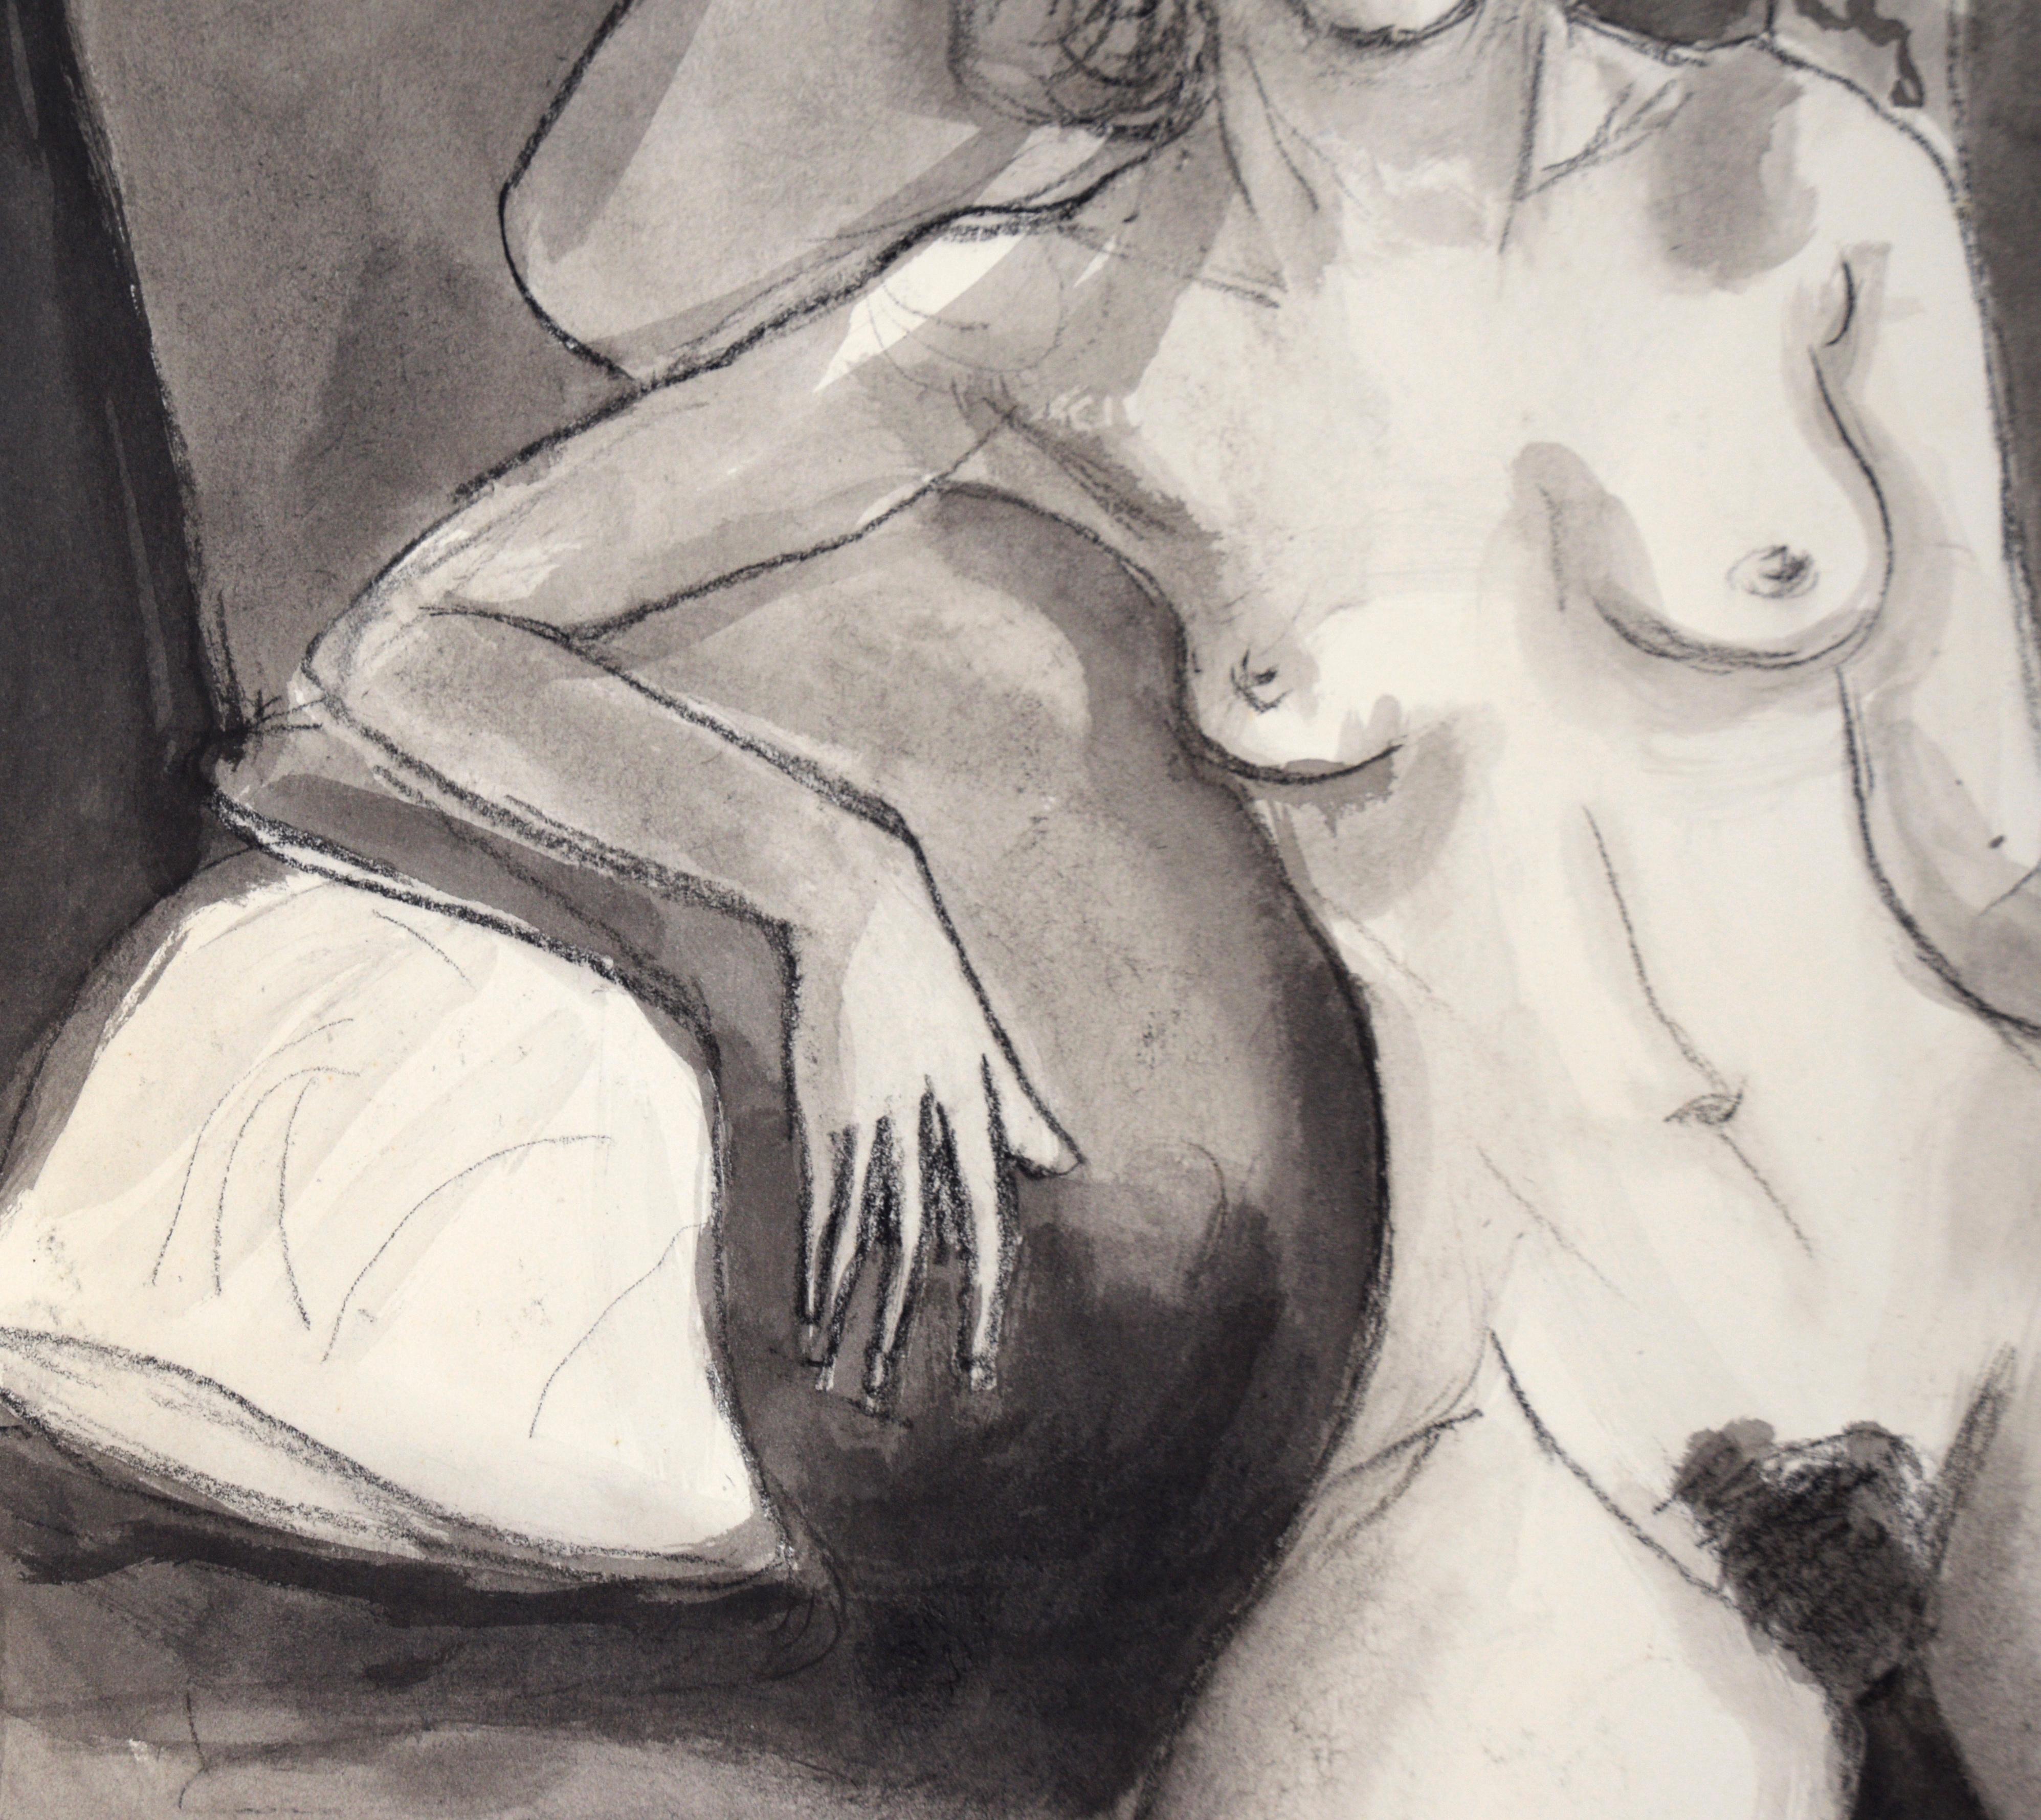 Nude Woman on Striped Chair #1 in Charcoal and Gouache on Paper

Black and white painting of a woman by acclaimed bluegrass musician Katherine 